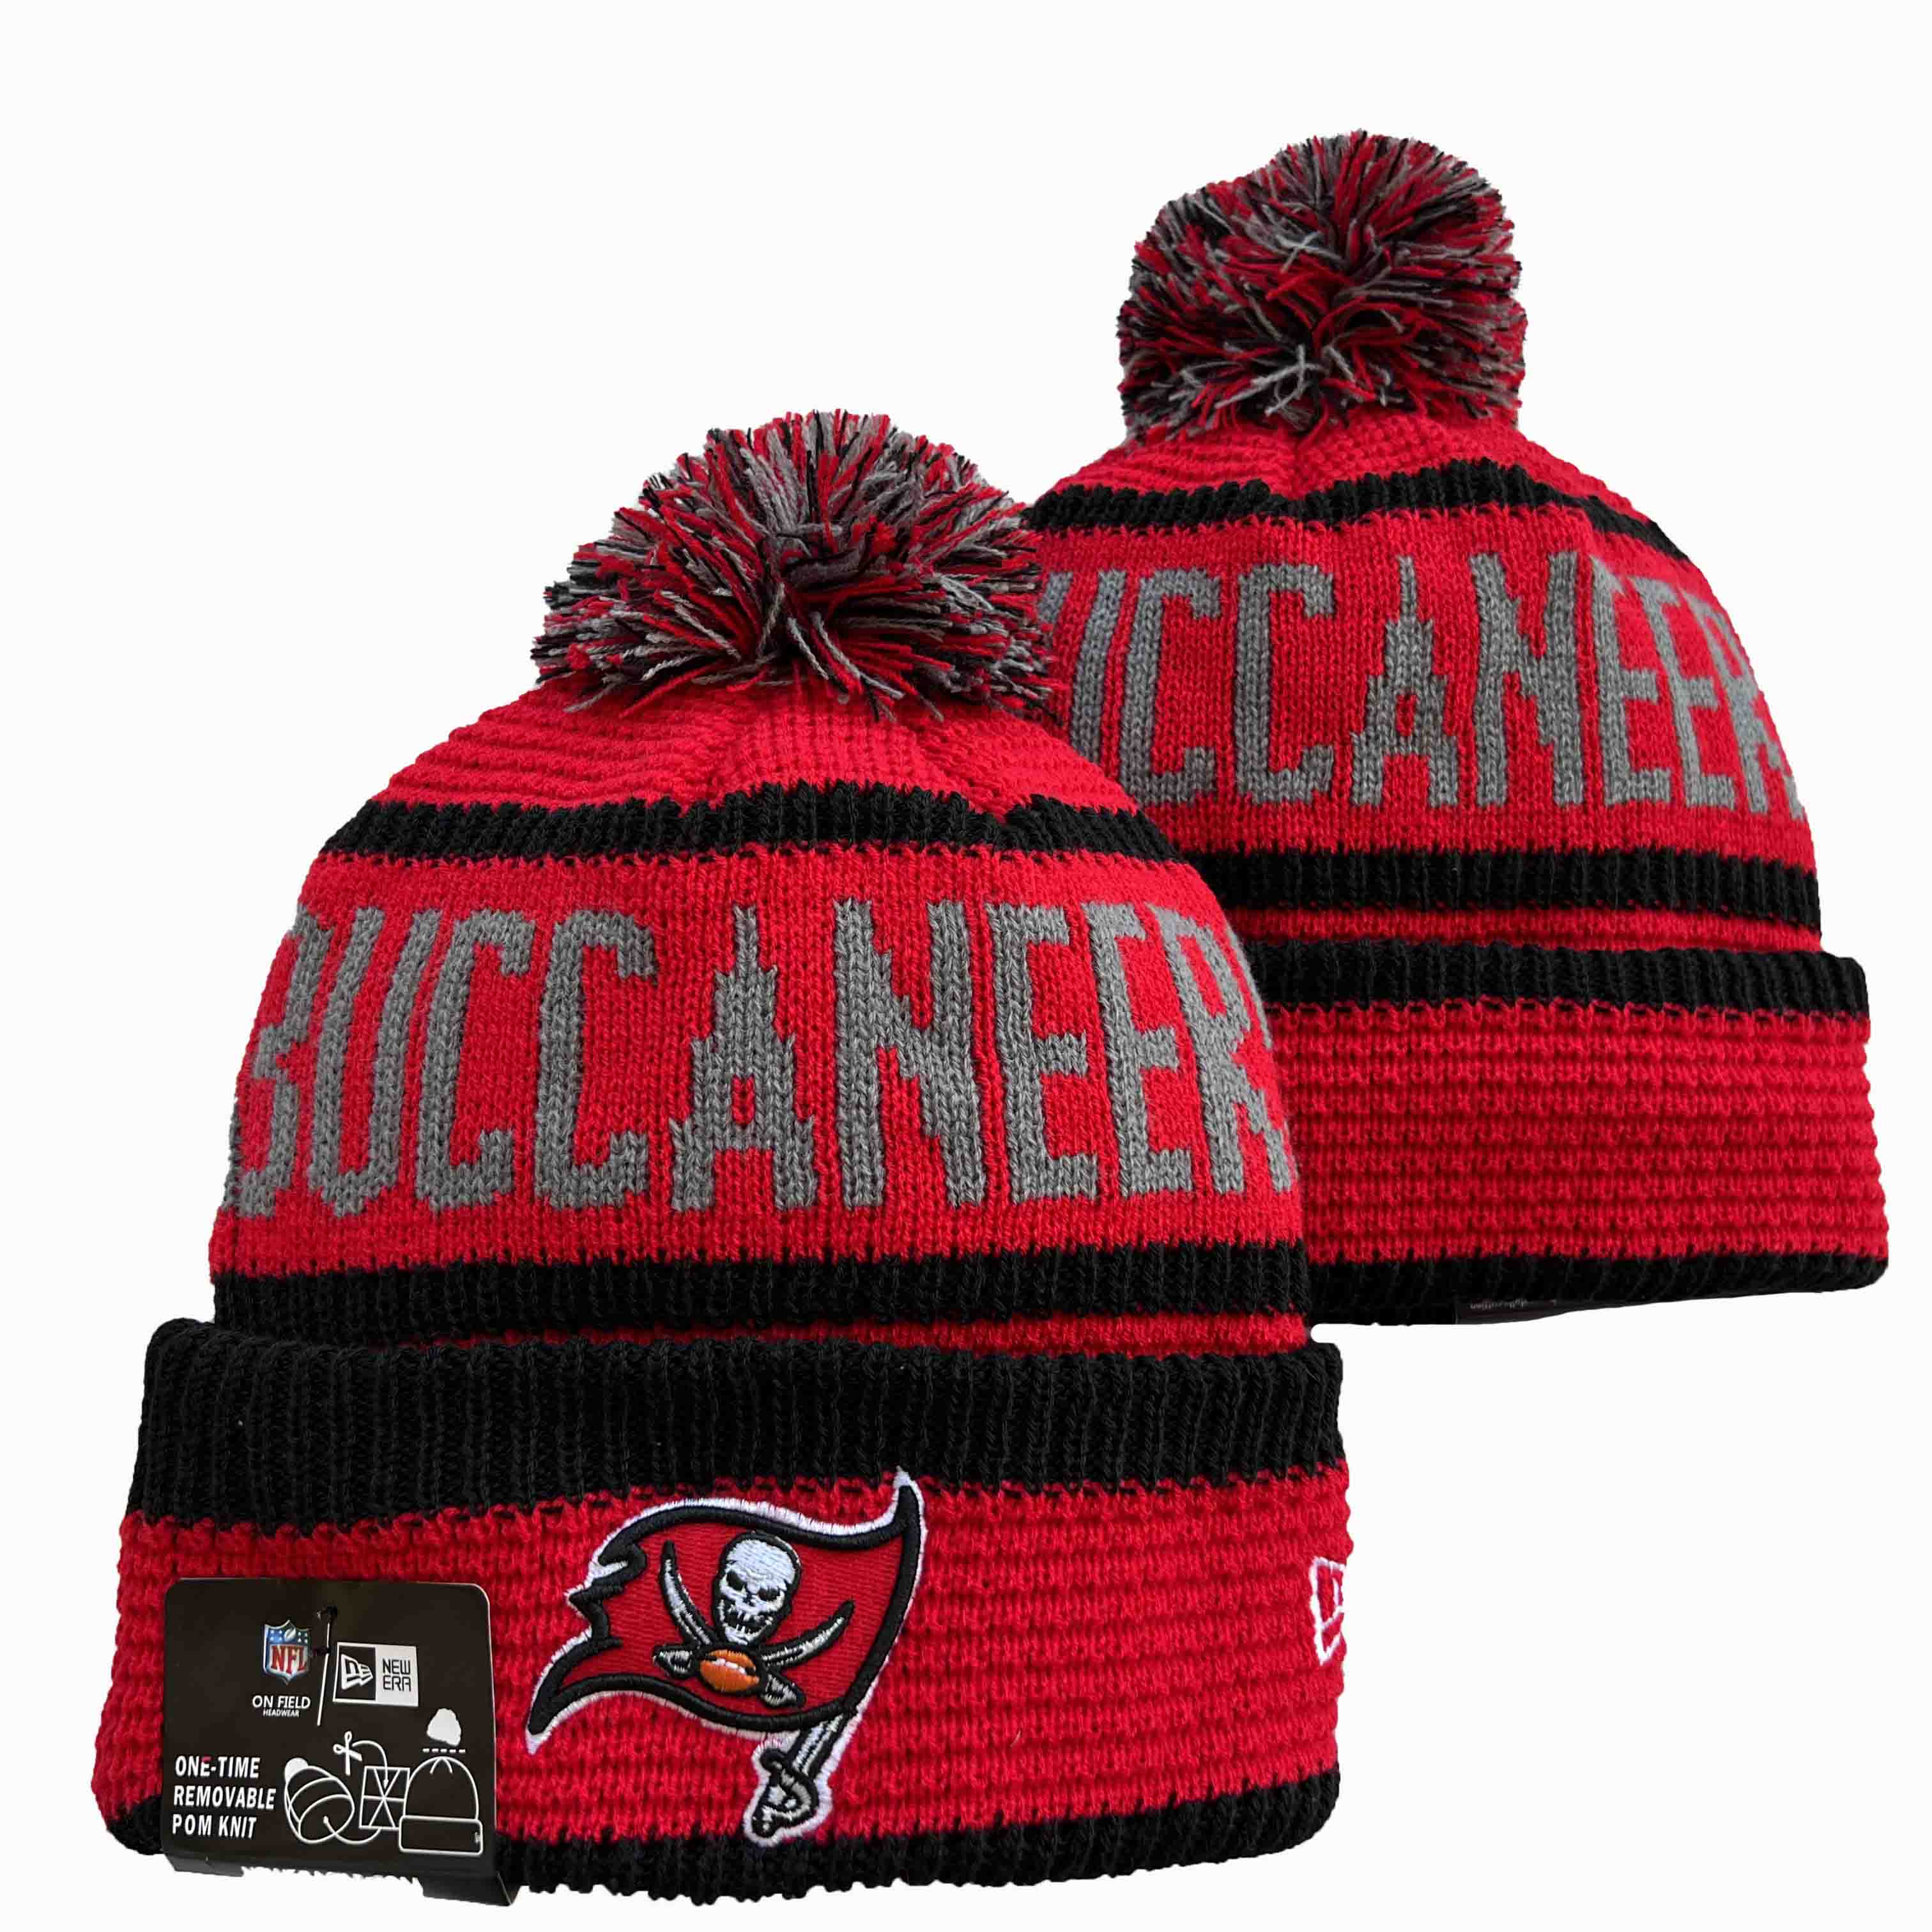 NFL Tampa Bay Buccaneers Beanies Knit Hats-YD1277